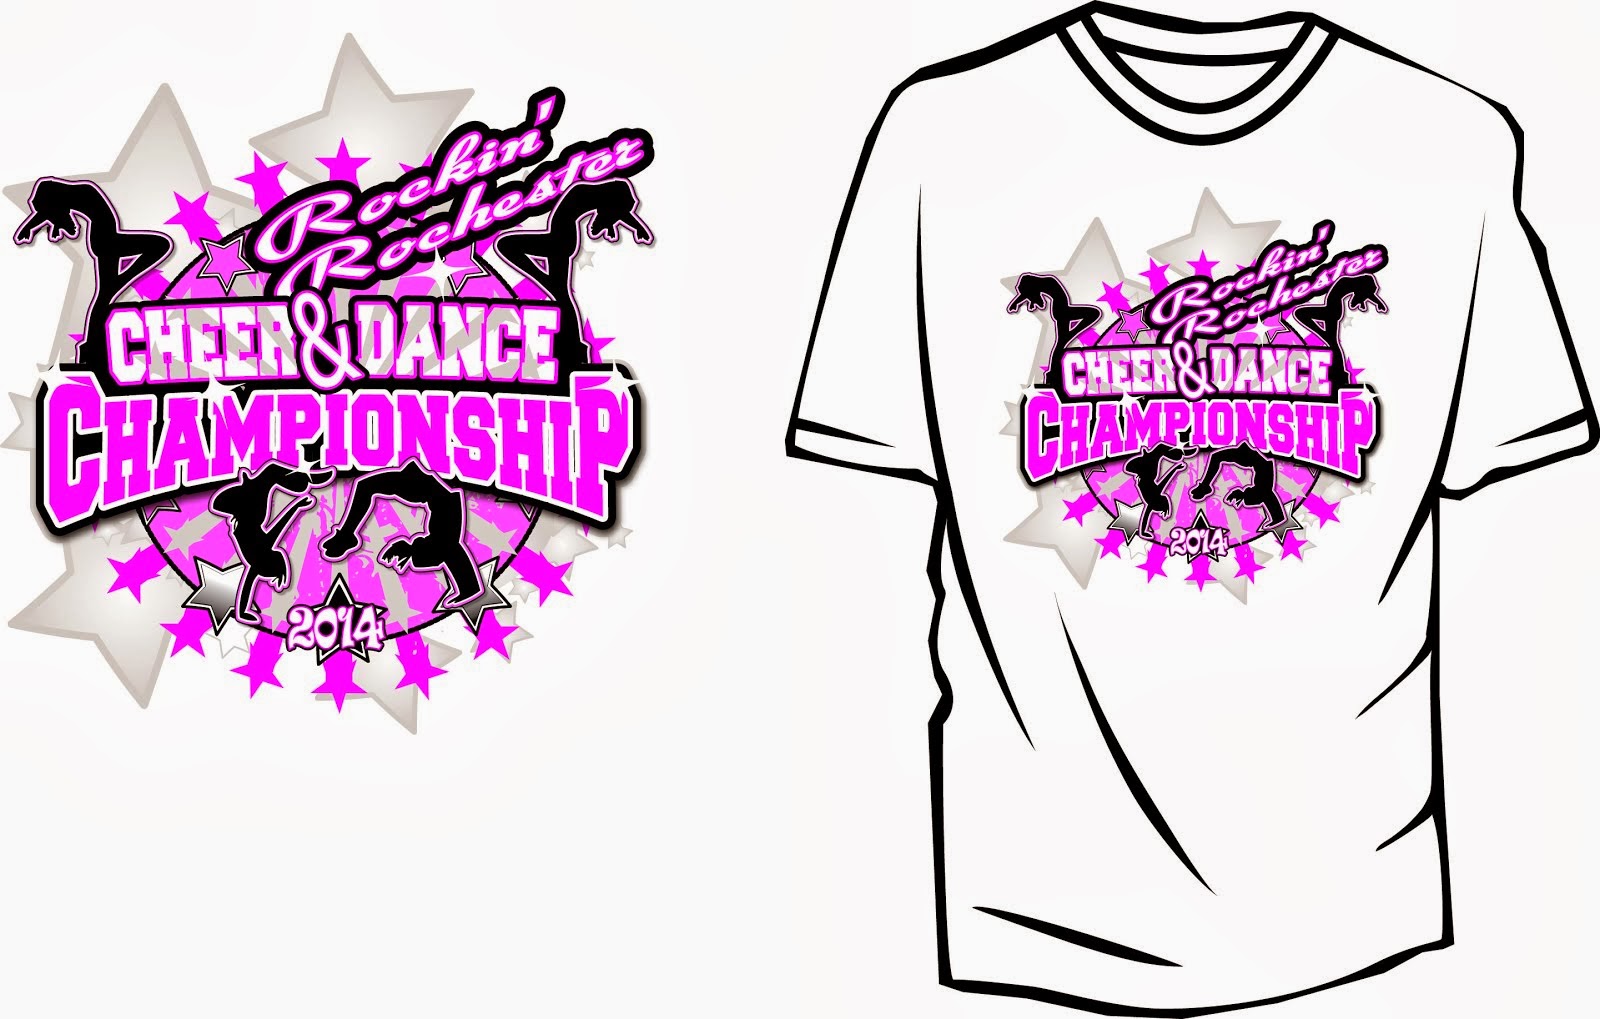 Cheer and Dance Apparel Design